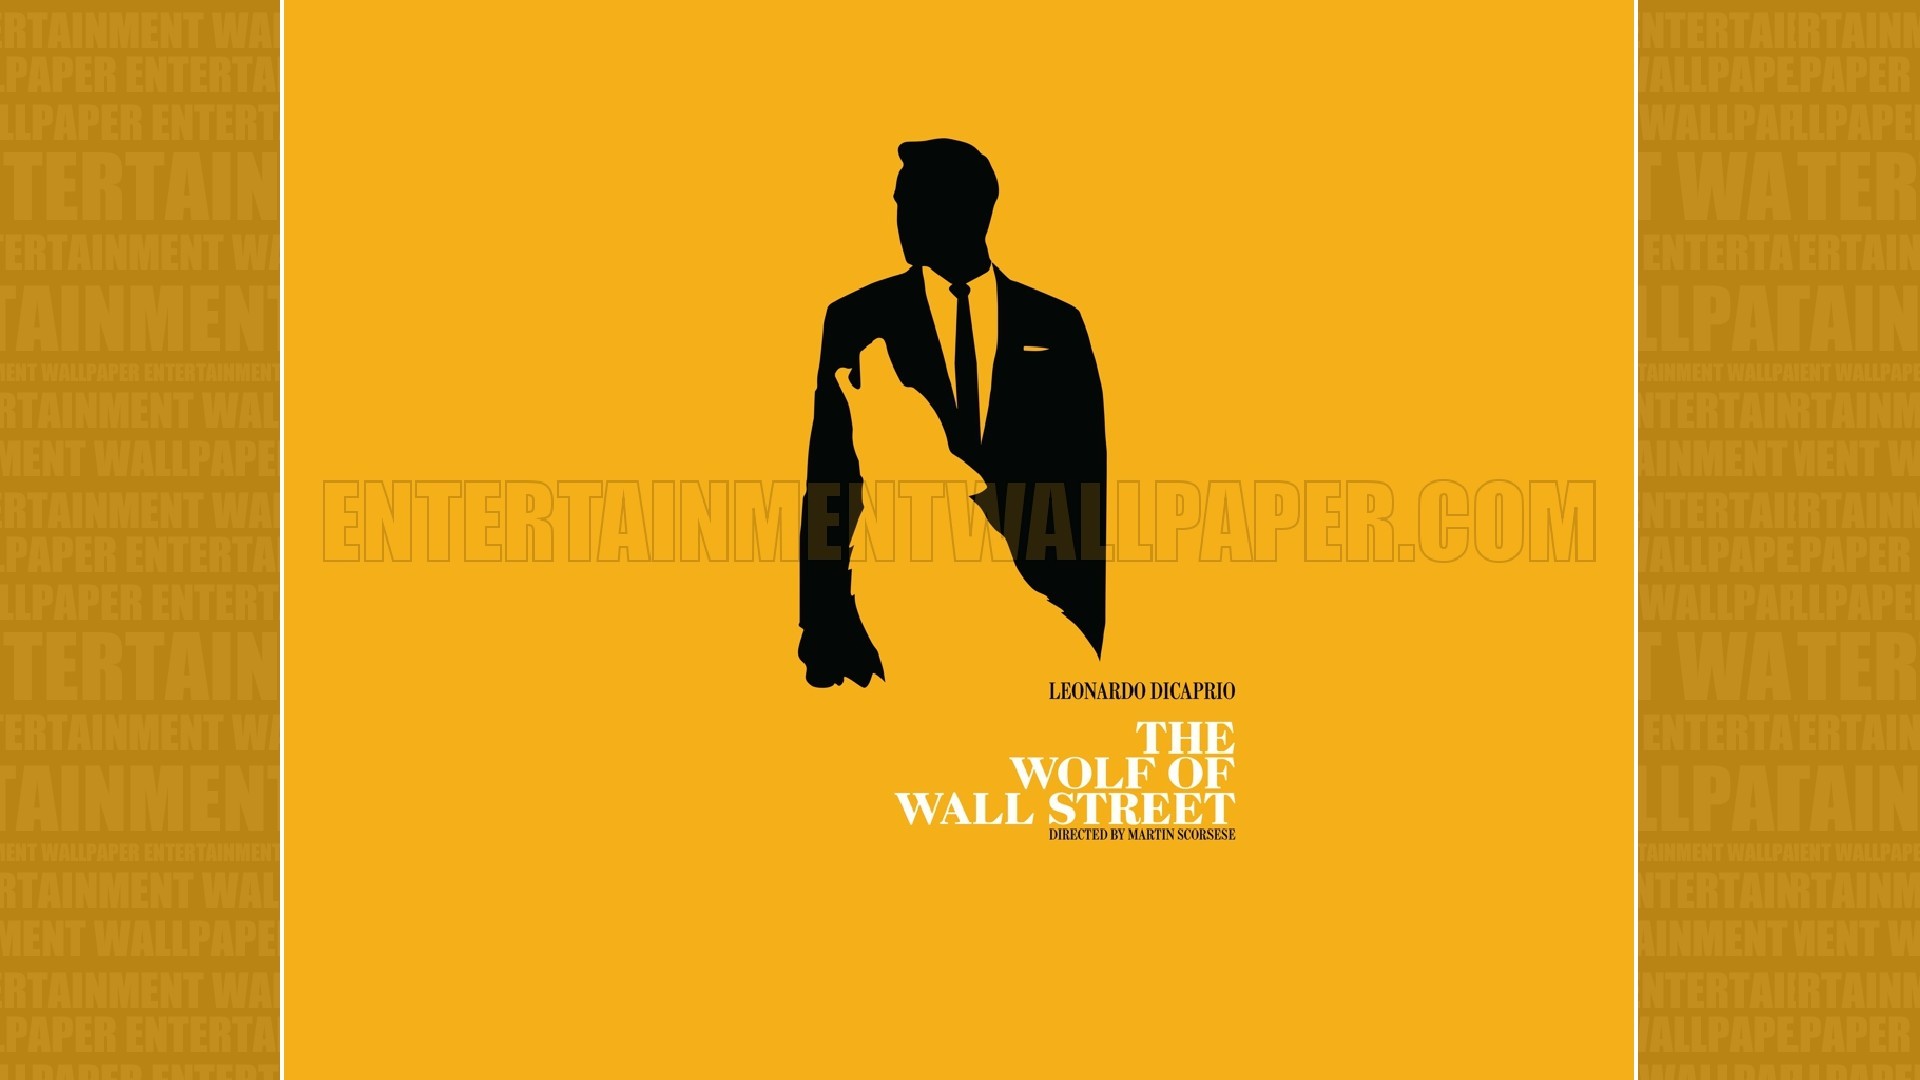 1920x1080 The Wolf of Wall Street Wallpaper - Original size, download now.